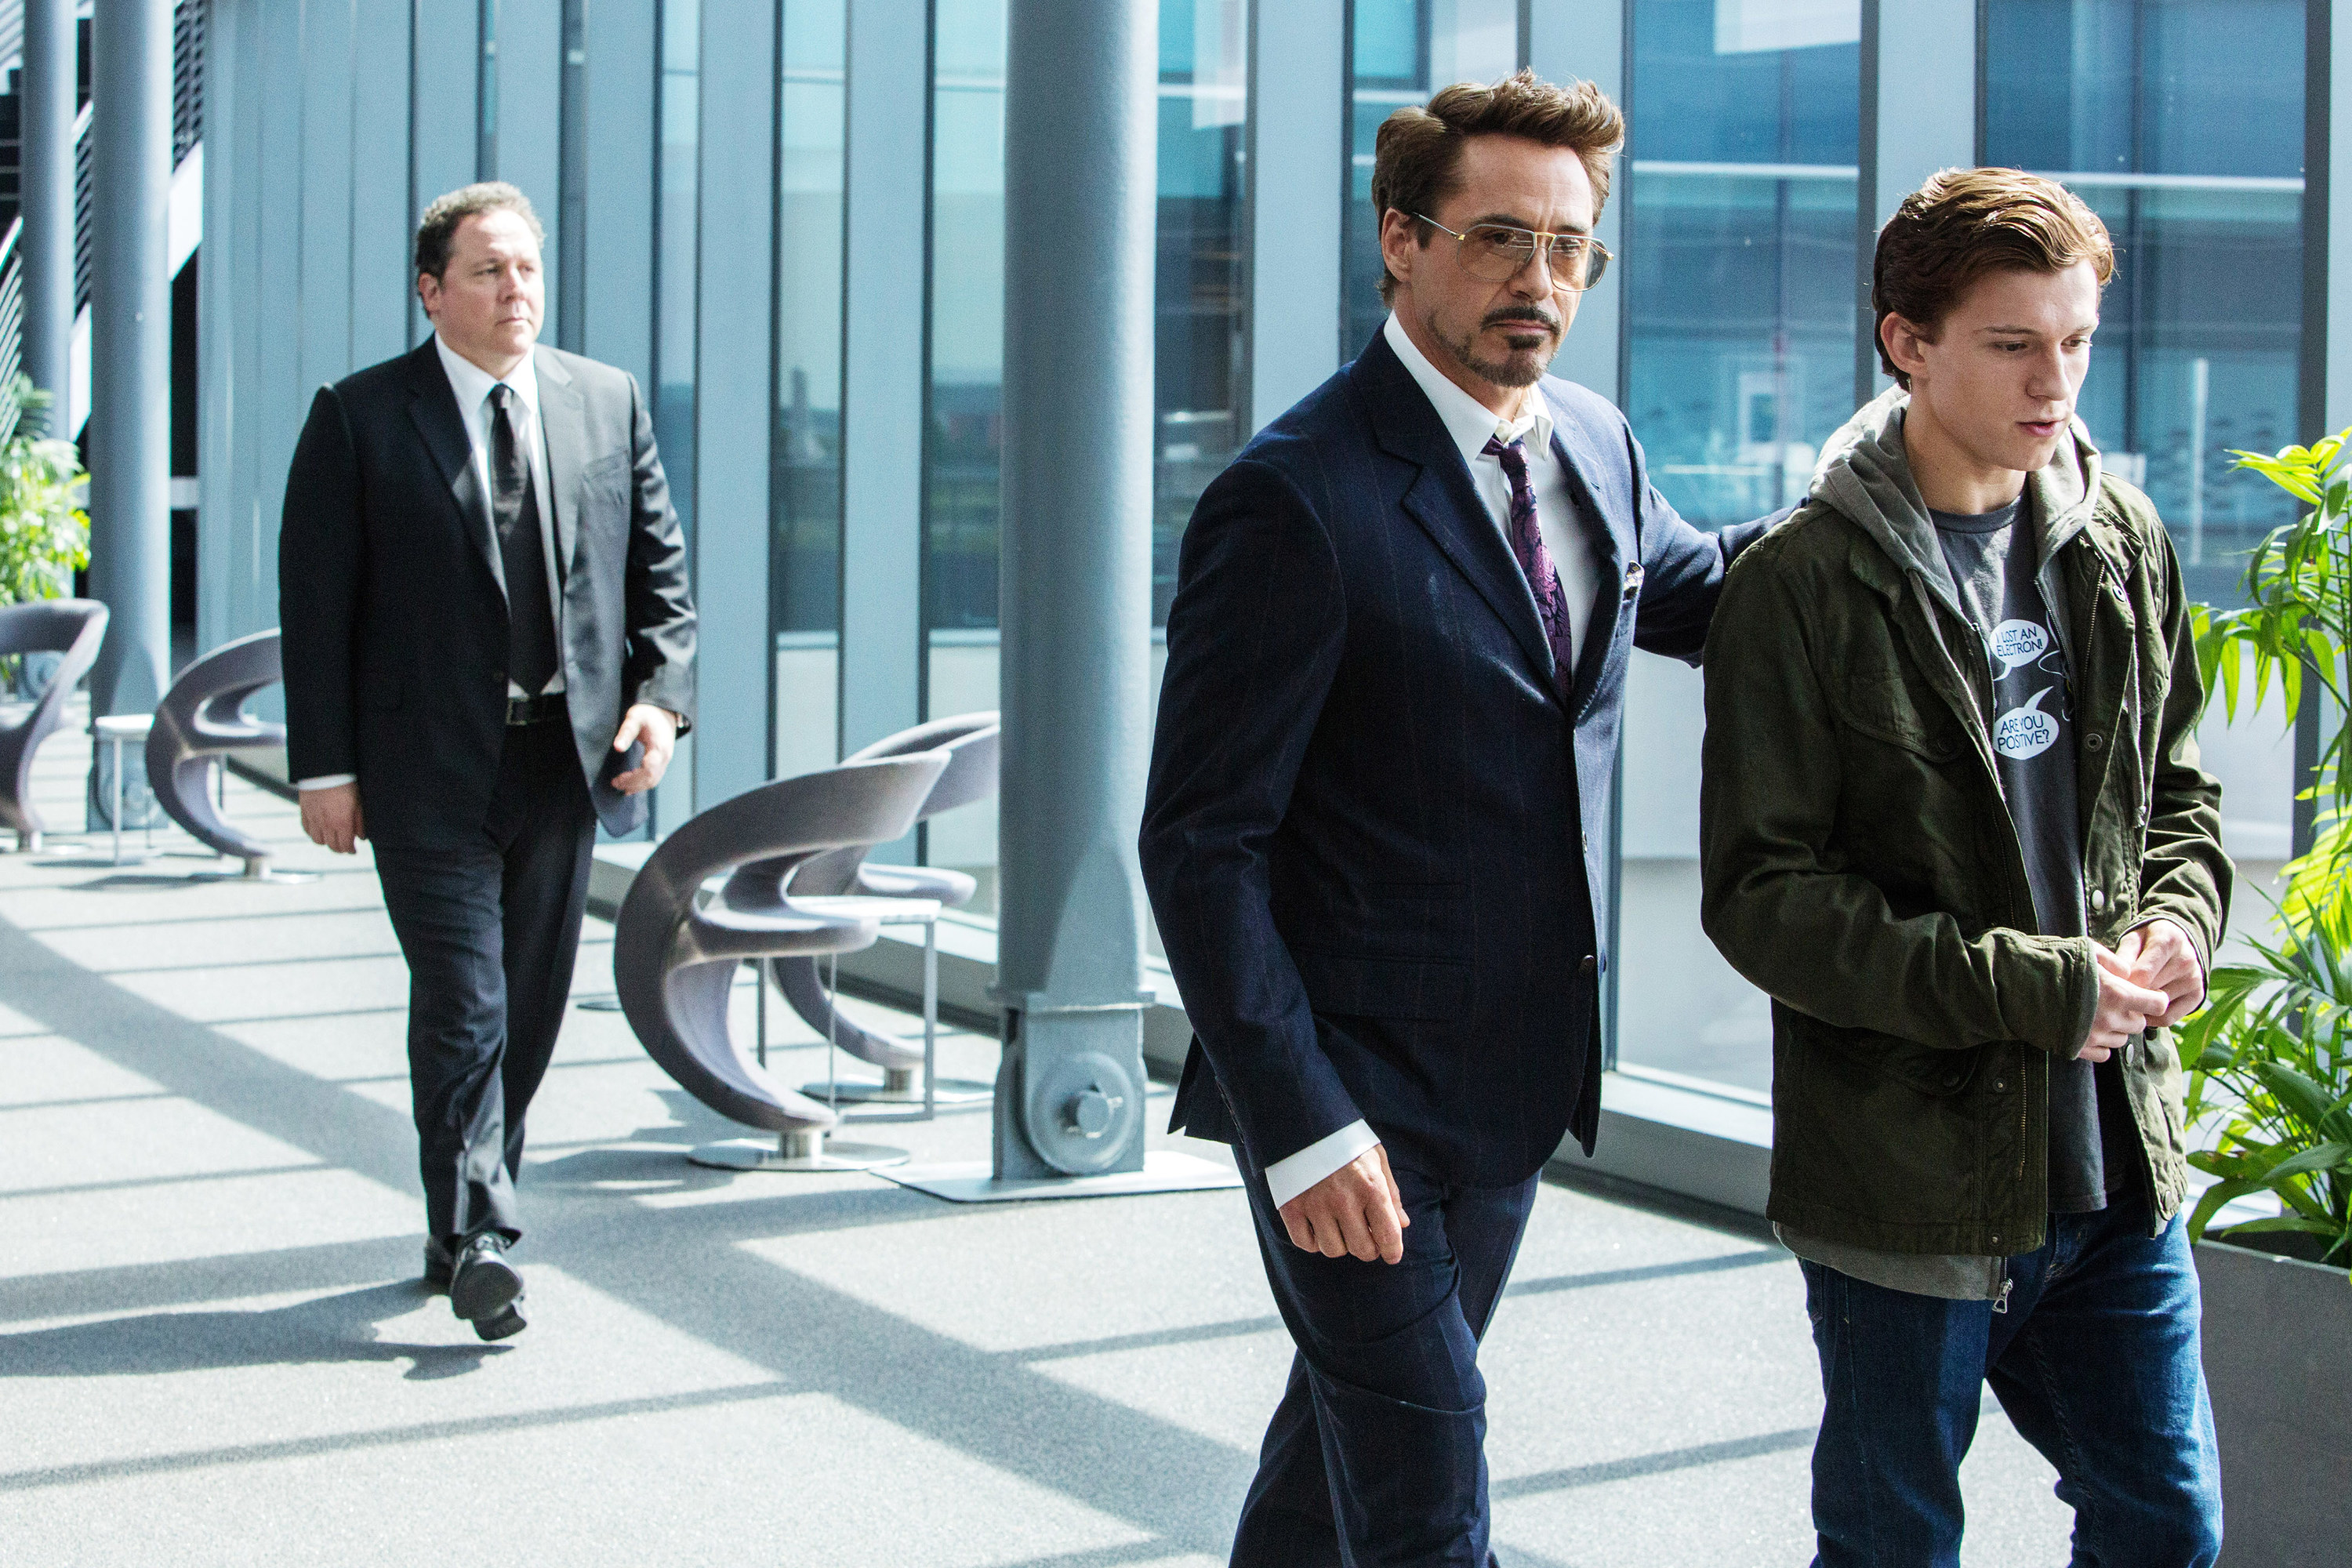 Iron Man pats Spider-Man on the back while Happy Hogan walks behind them